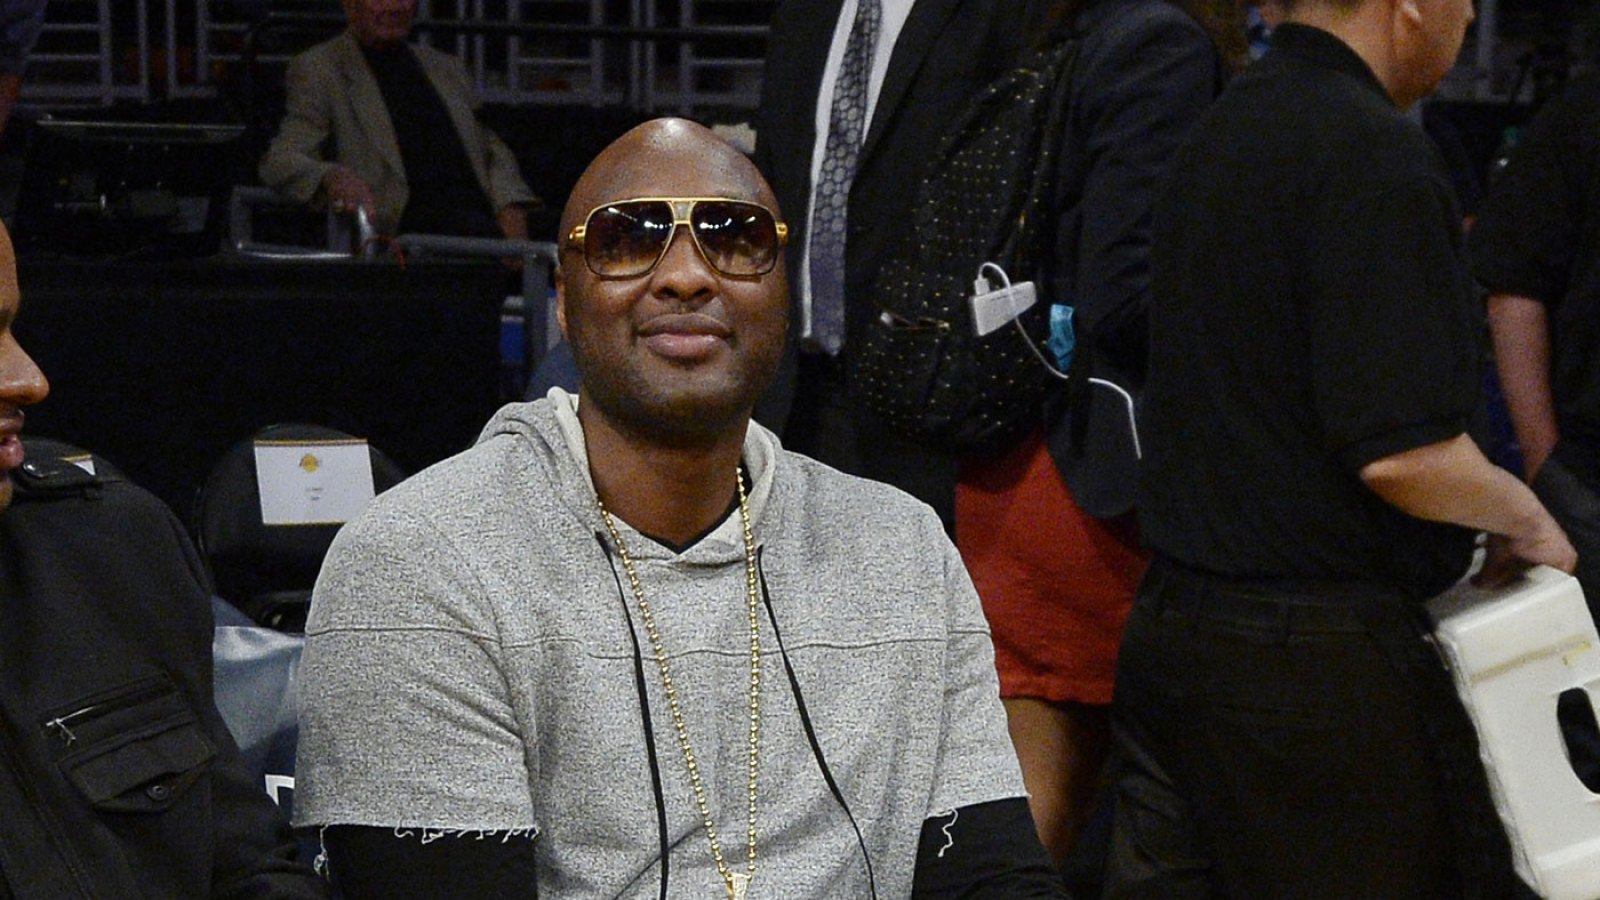 Lamar Odom returns to the Staples Center for an L.A. Lakers game